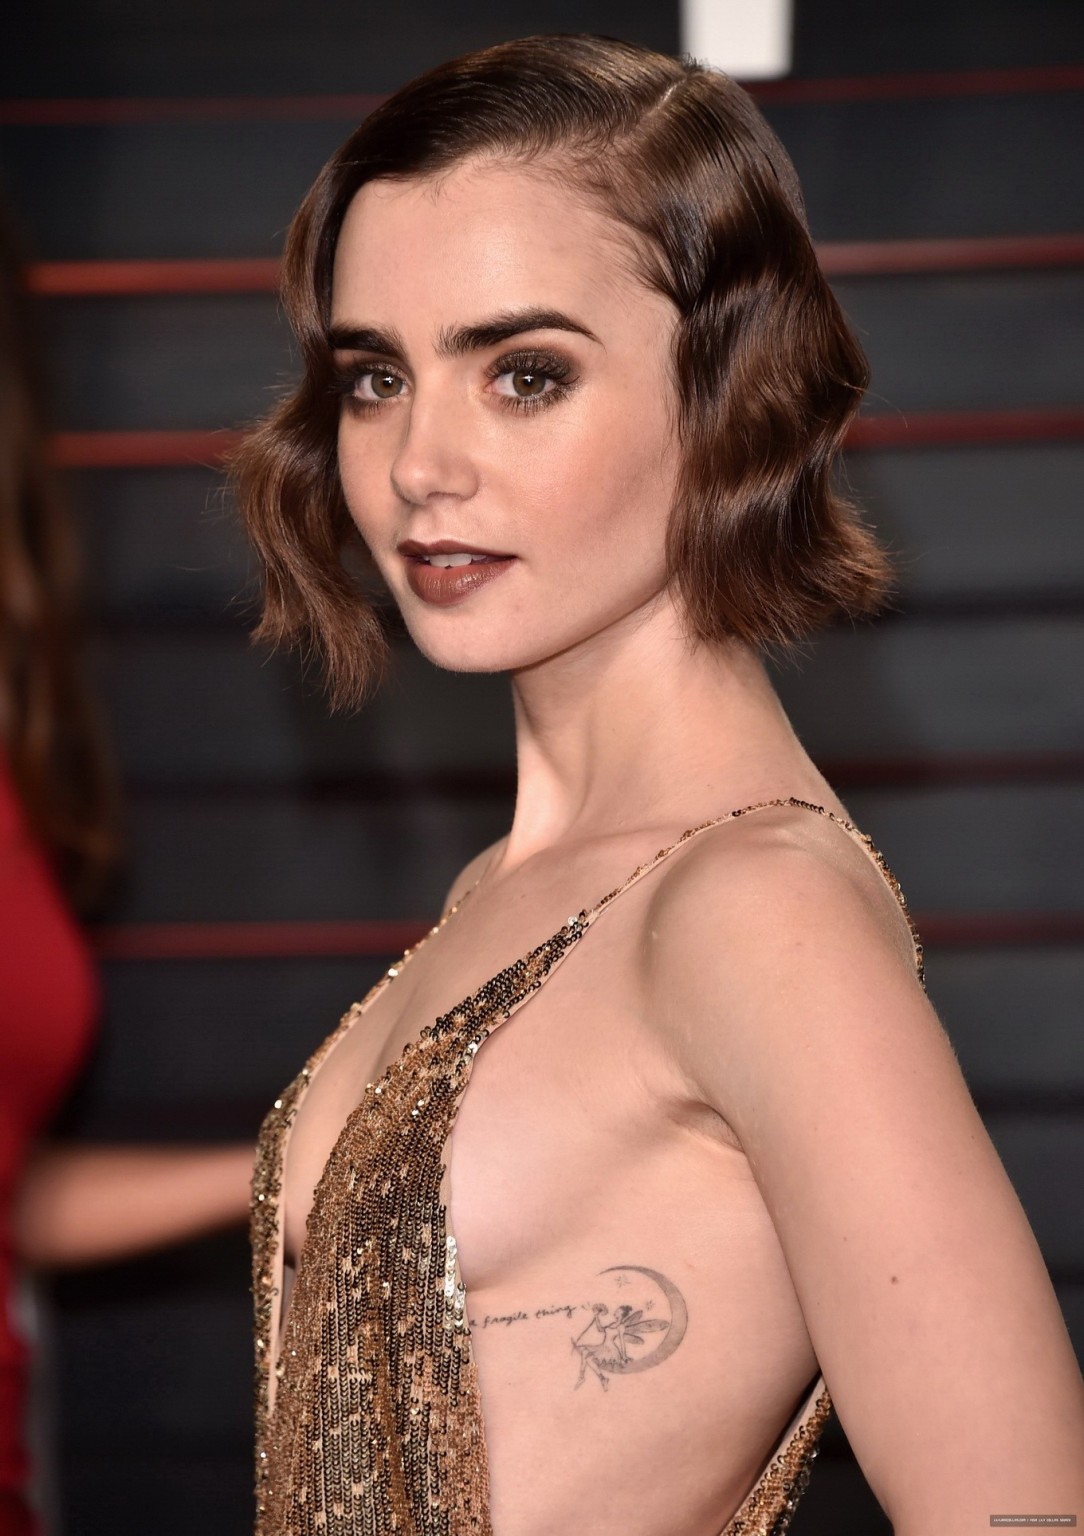 Lily Collins showing sideboob huge cleavage and legs #75145294